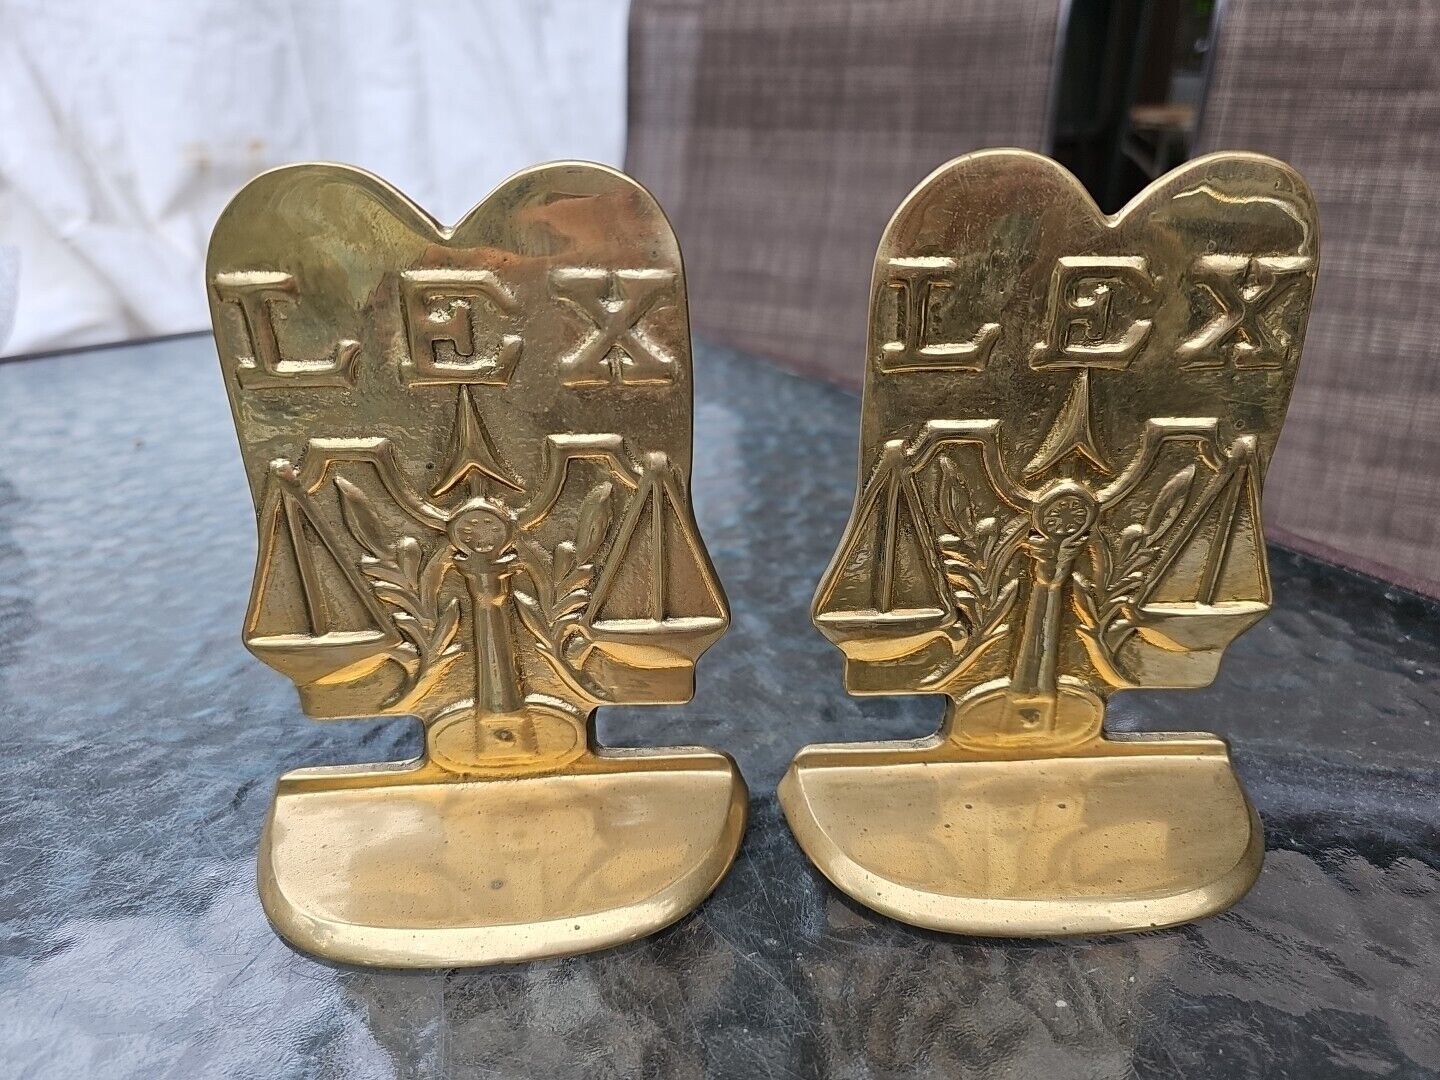 Pair of Vintage Solid Brass Book Ends LEX Scales of Justice Lawyer Legal Law